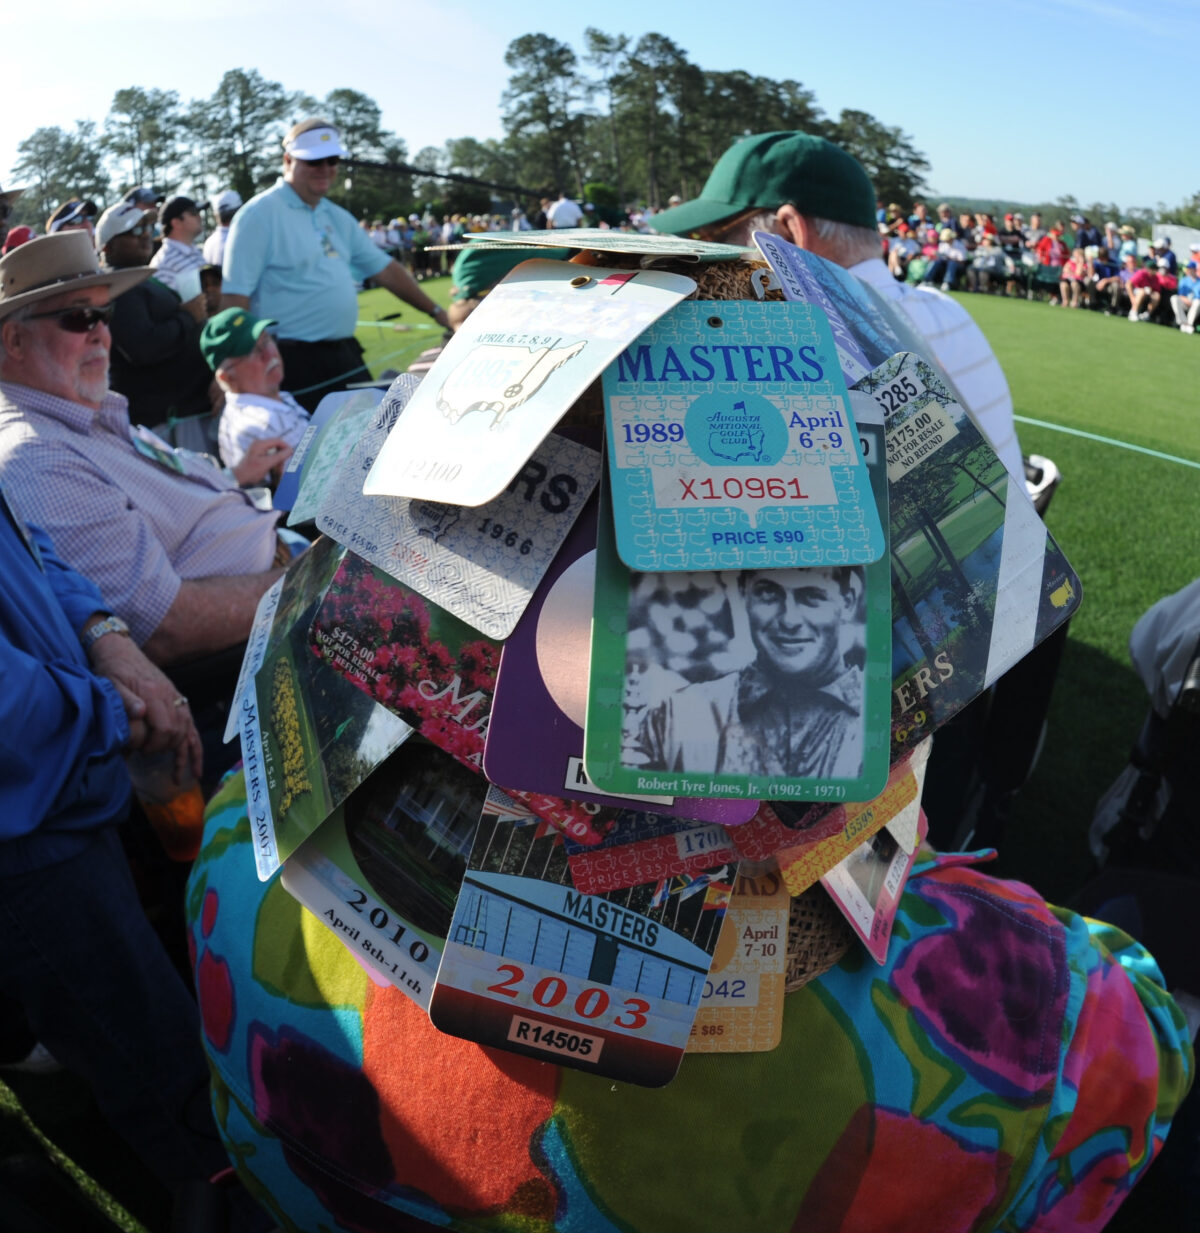 Want to go to the Masters Tournament? Here is what golf fans need to know